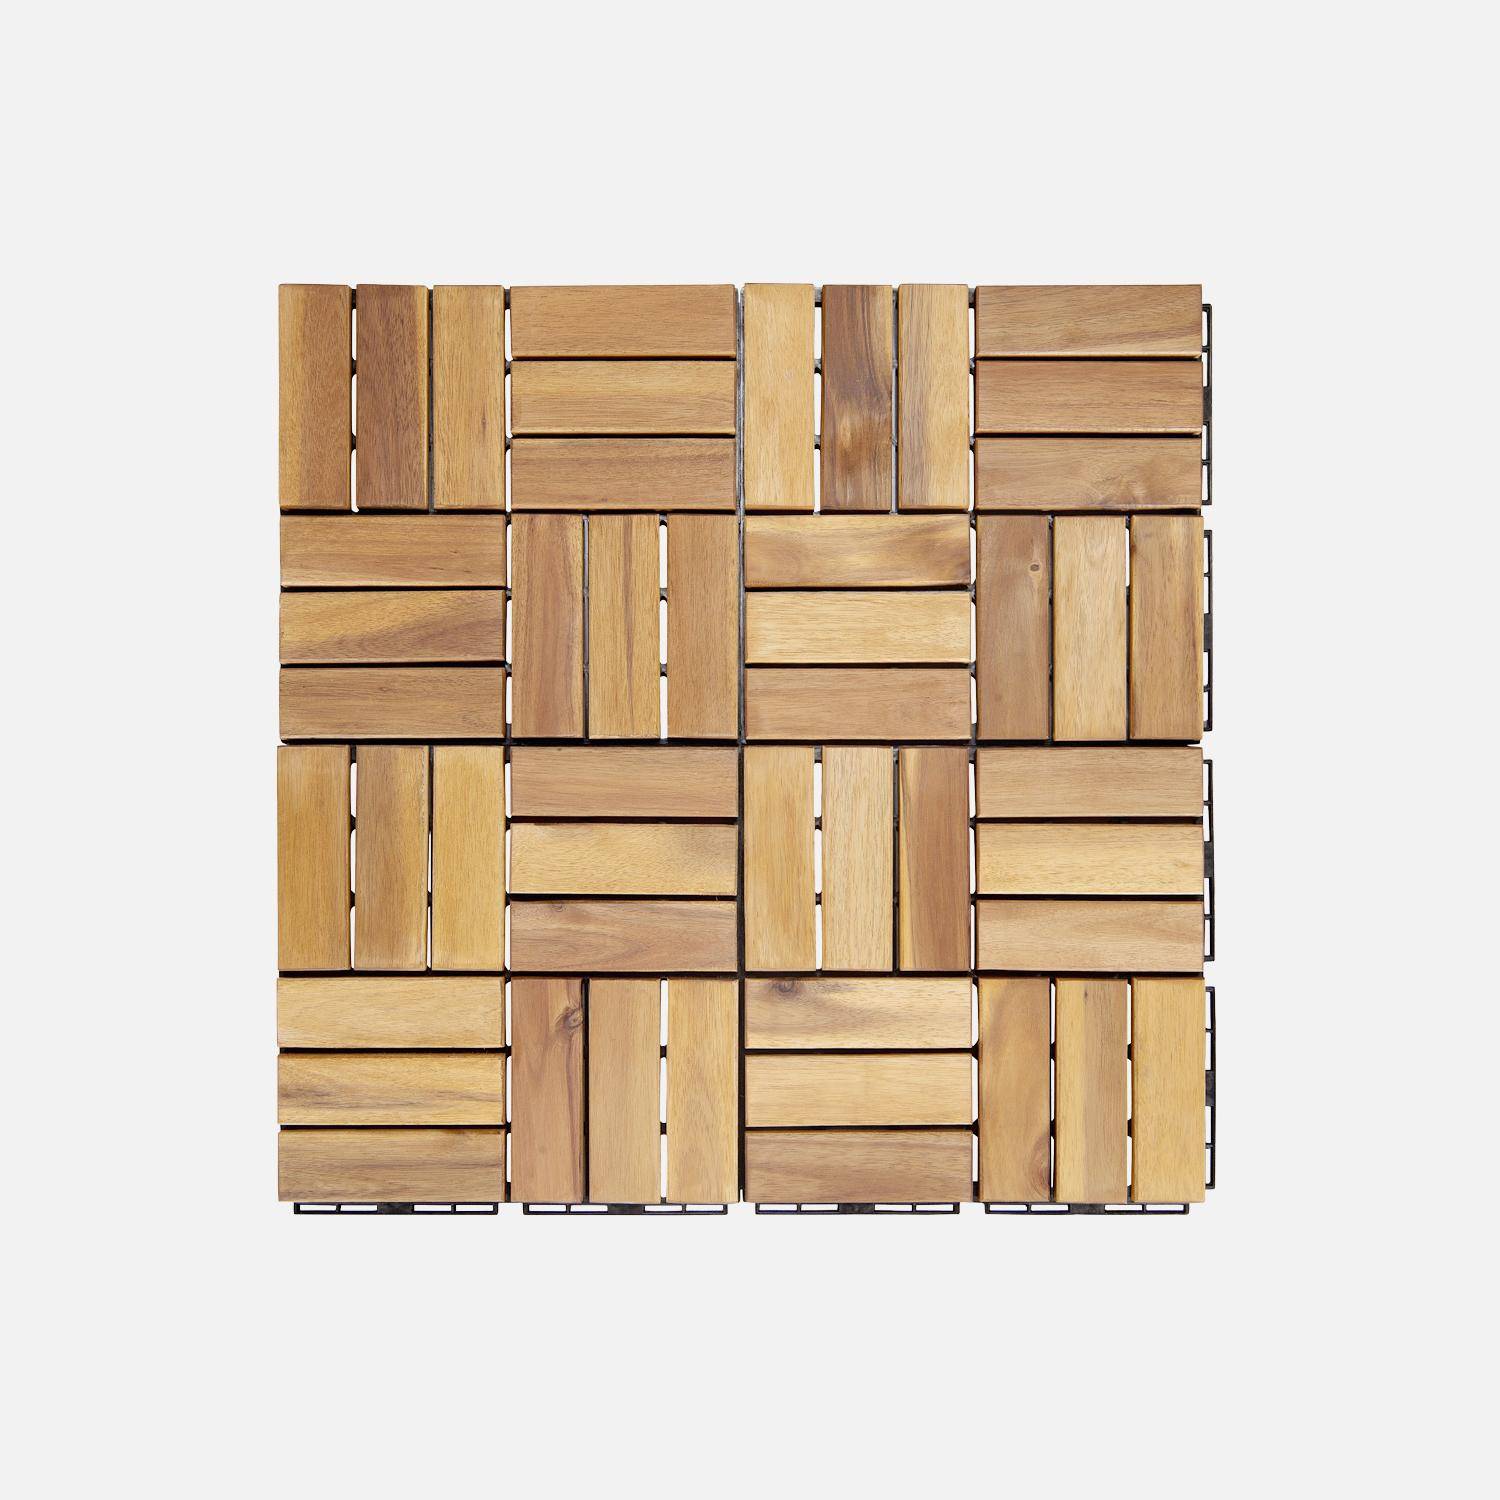 Batch of 36 acacia wood decking tiles 30x30cm, square pattern, clip-on Photo4